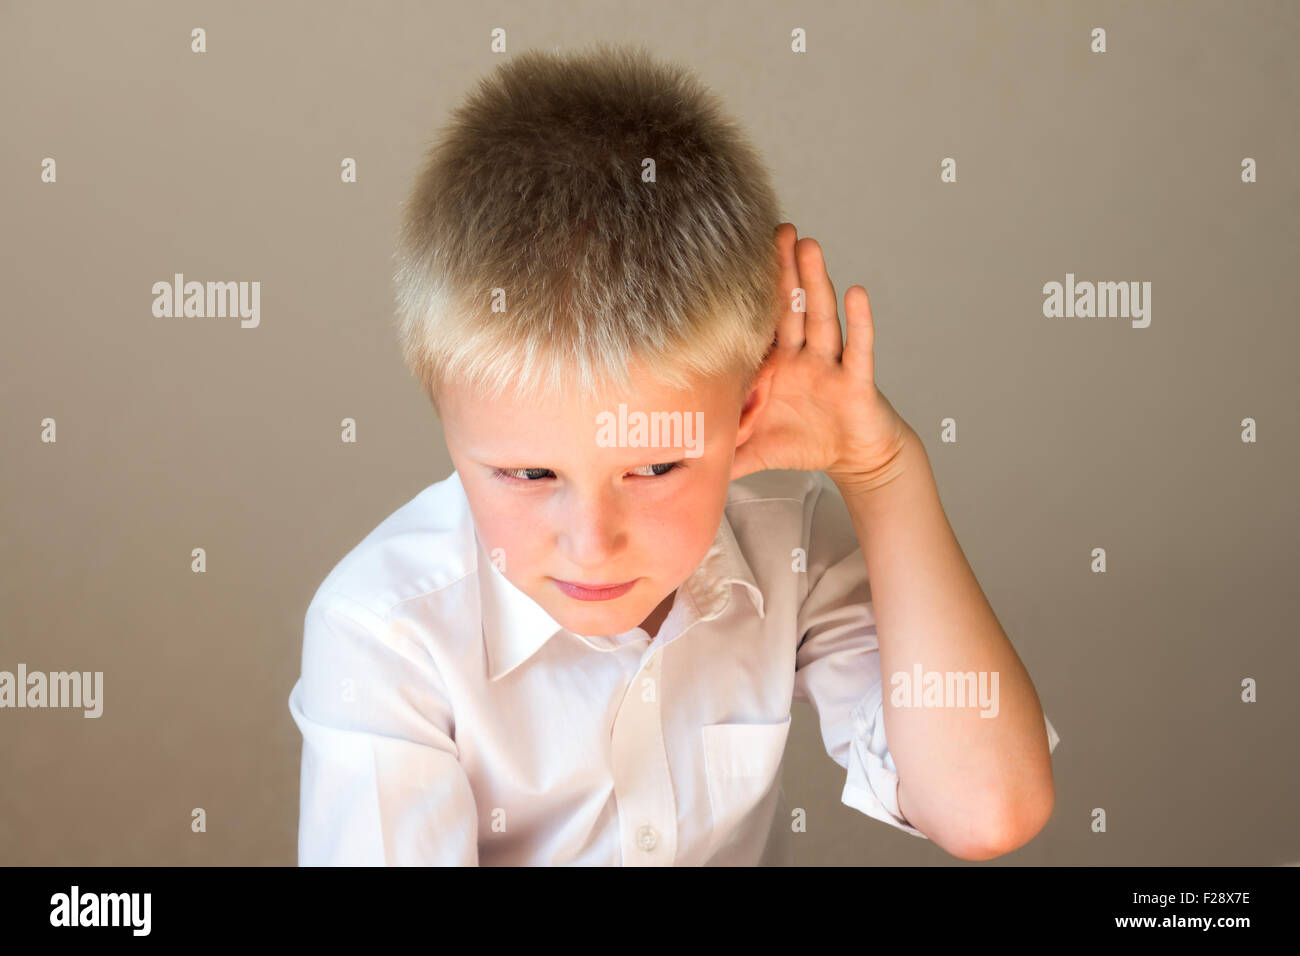 Child listening overhearing something with hand to ear concept Stock Photo